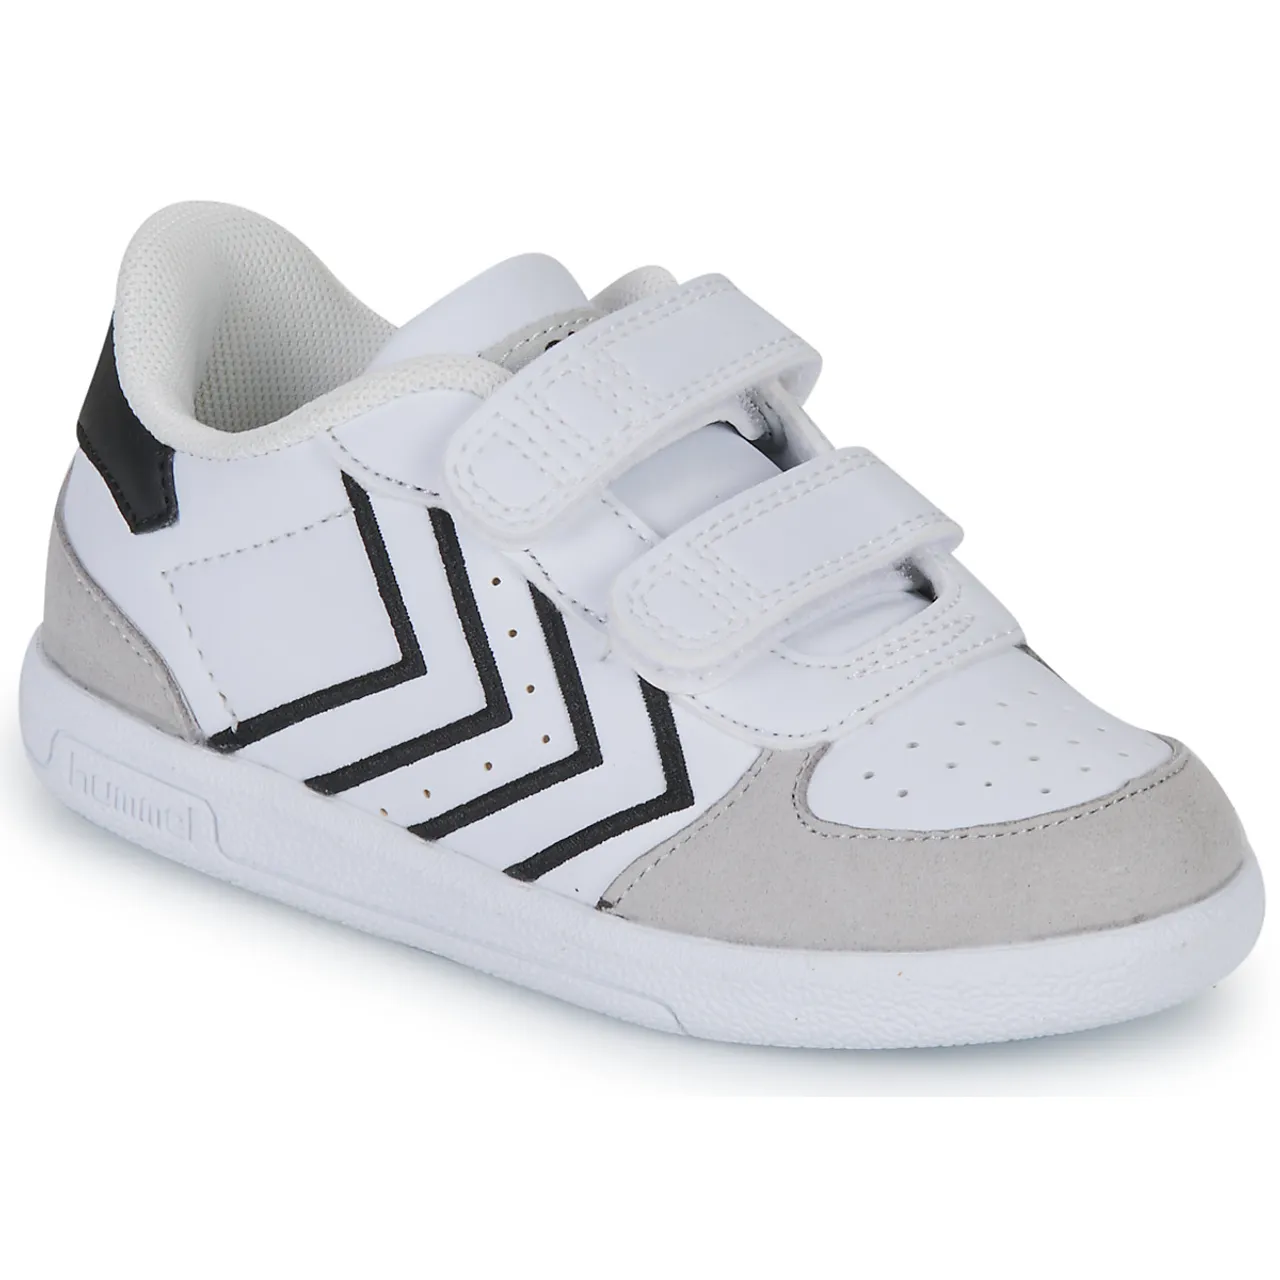 hummel  VICTORY JR  boys's Children's Indoor Sports Trainers (Shoes) in White